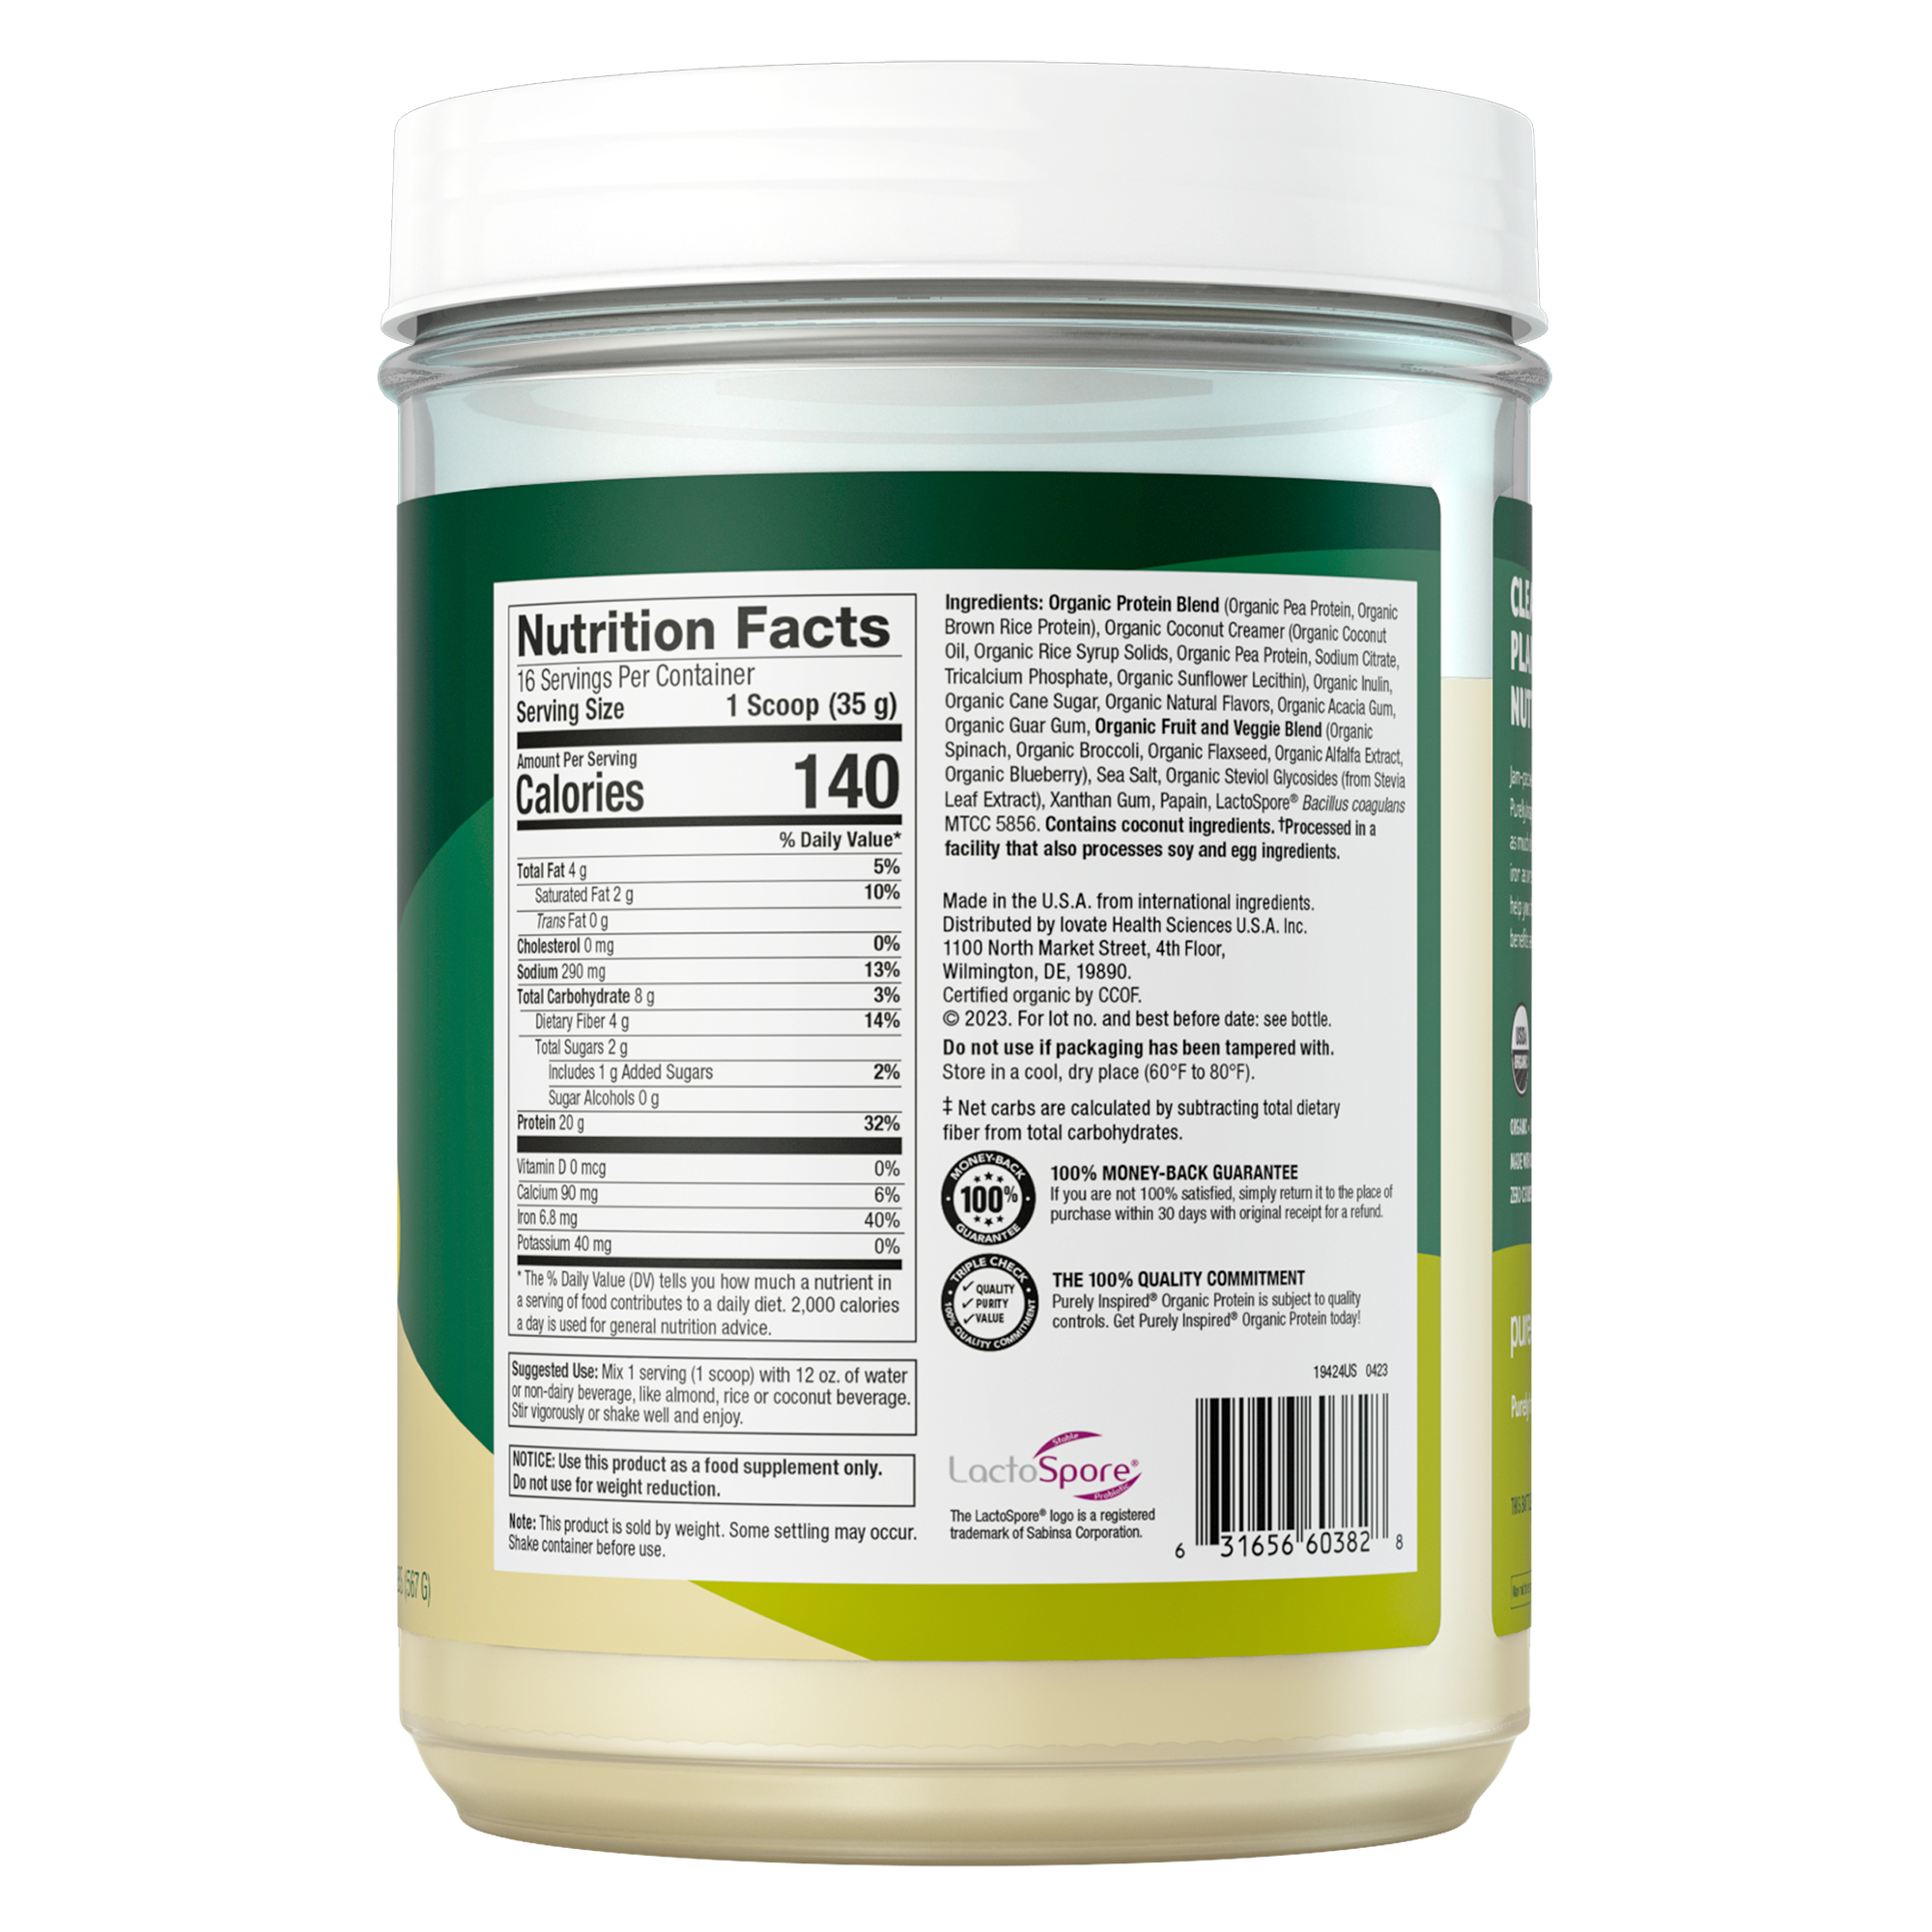 Purely Inspired Organic Plant-Based Protein Powder, Vanilla, 20g Protein, 1.25 lbs, 16 Servings - image 4 of 10